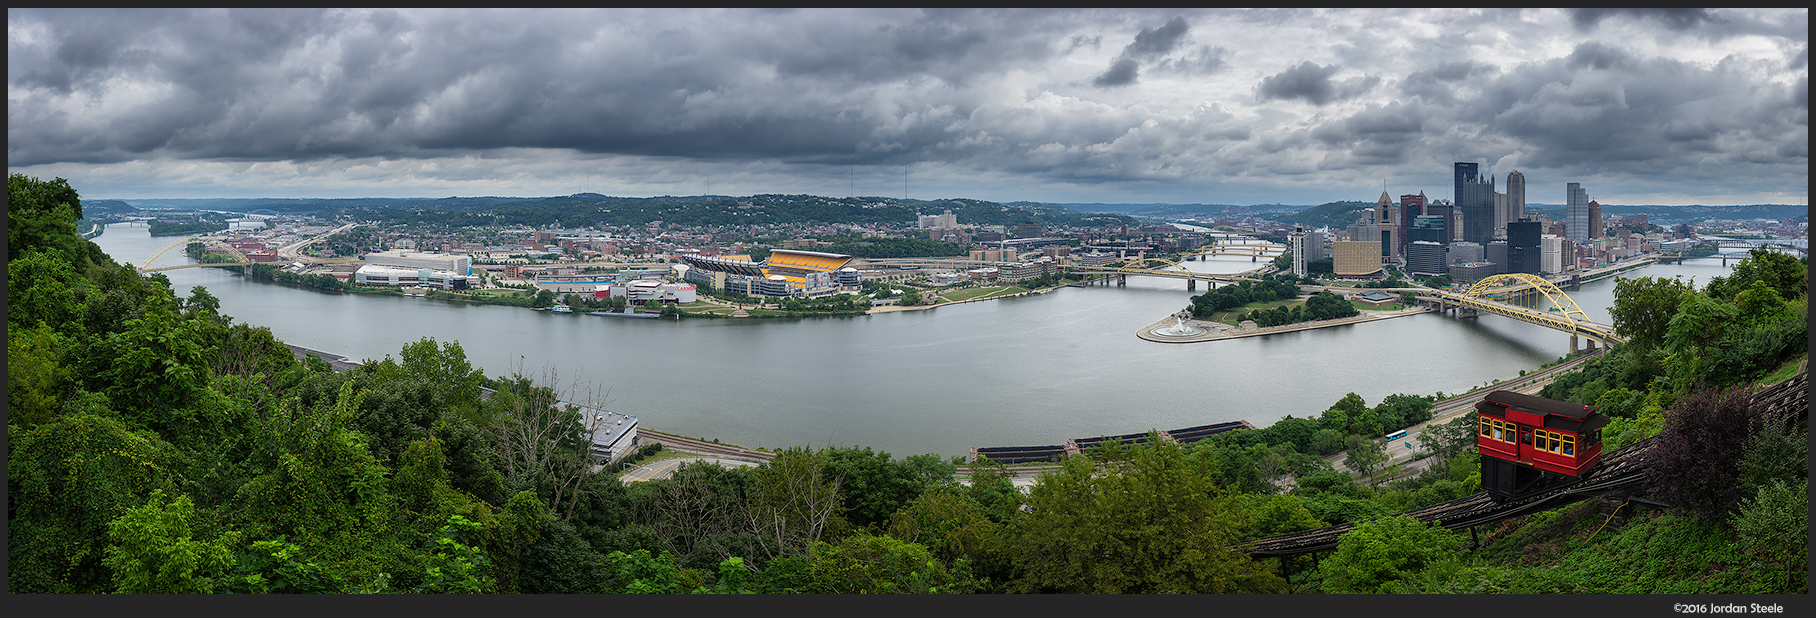 Pittsburgh - Sony A7 II with Zeiss FE 16-35mm f/4 ZA OSS